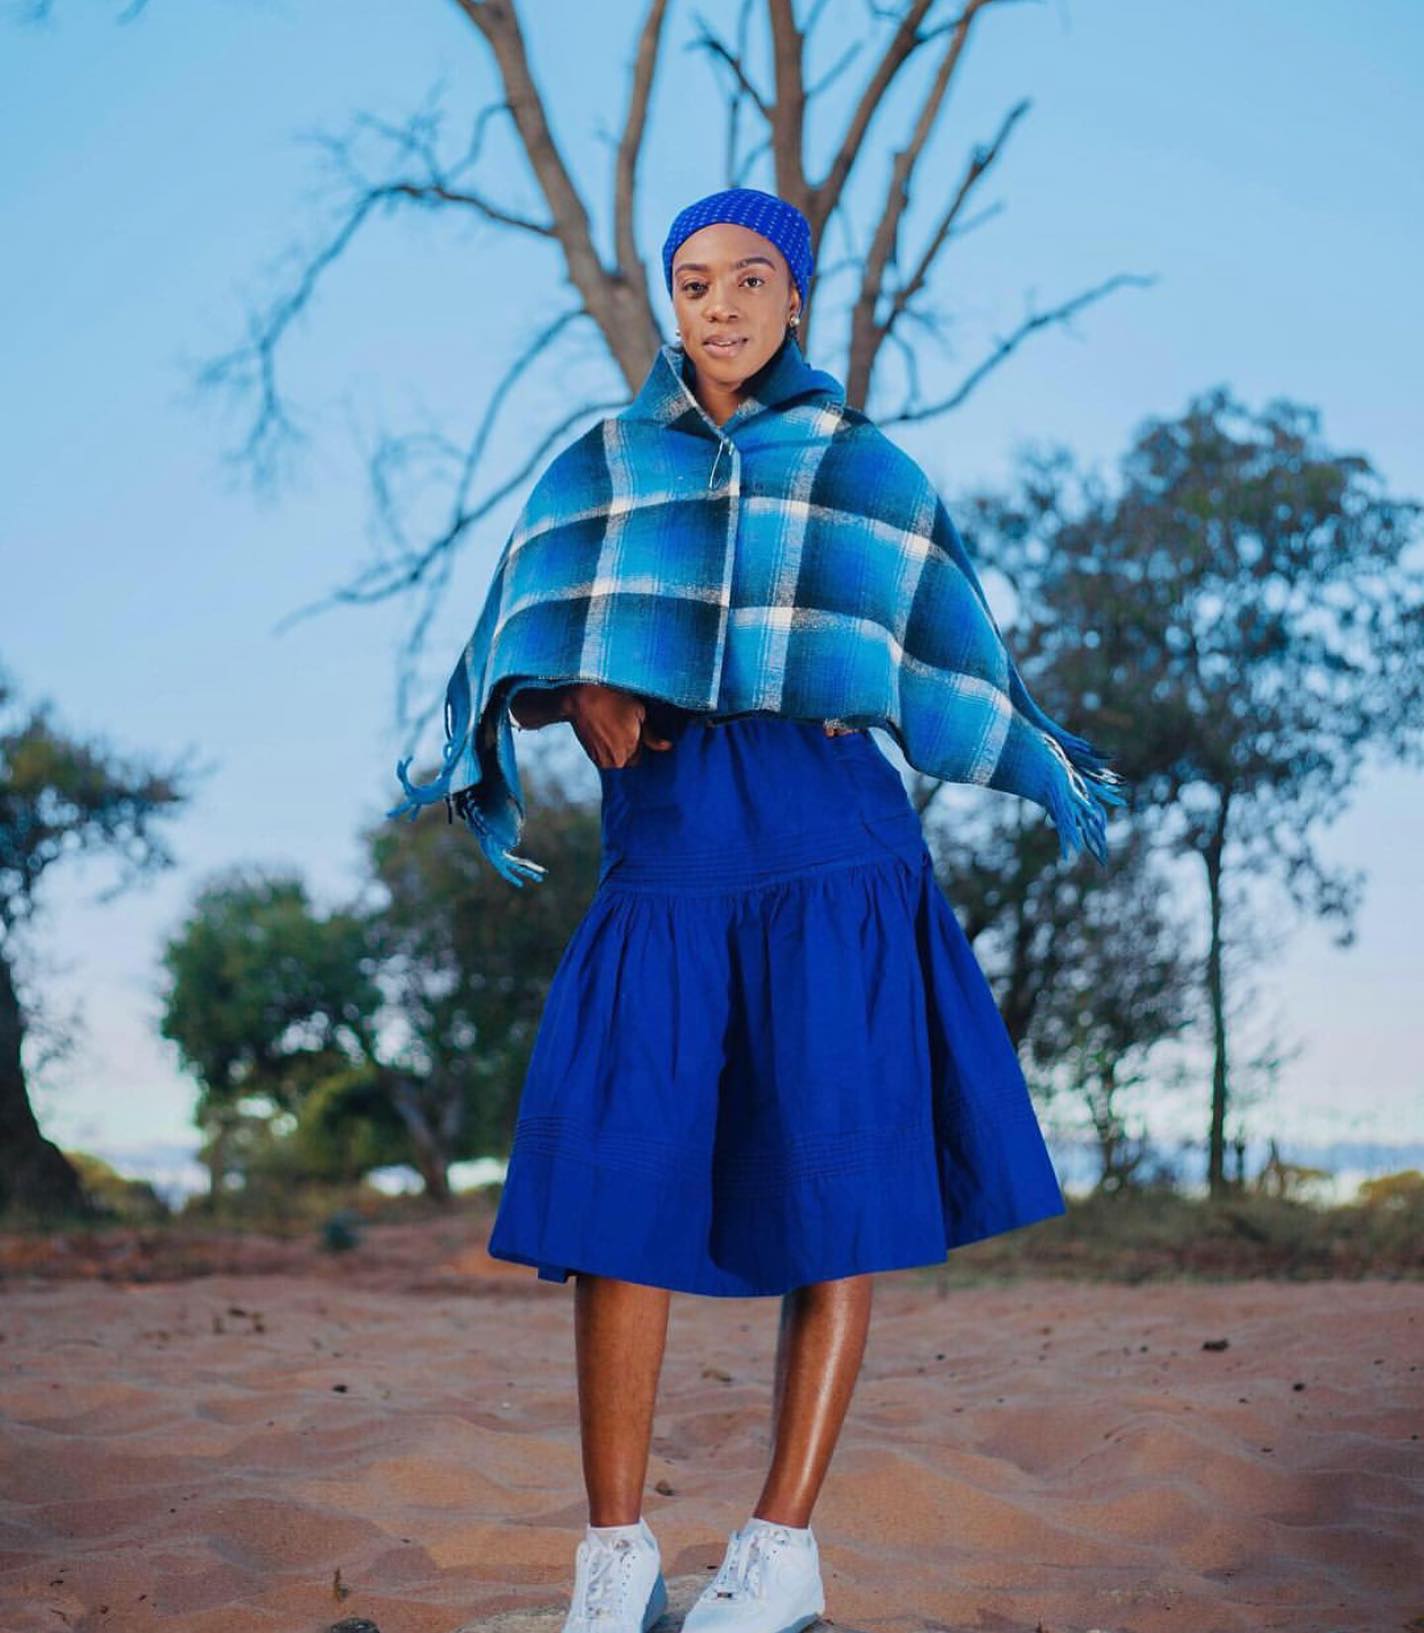 Amazing Tswana Dresses: A Fabric Steeped in History and Tradition 21